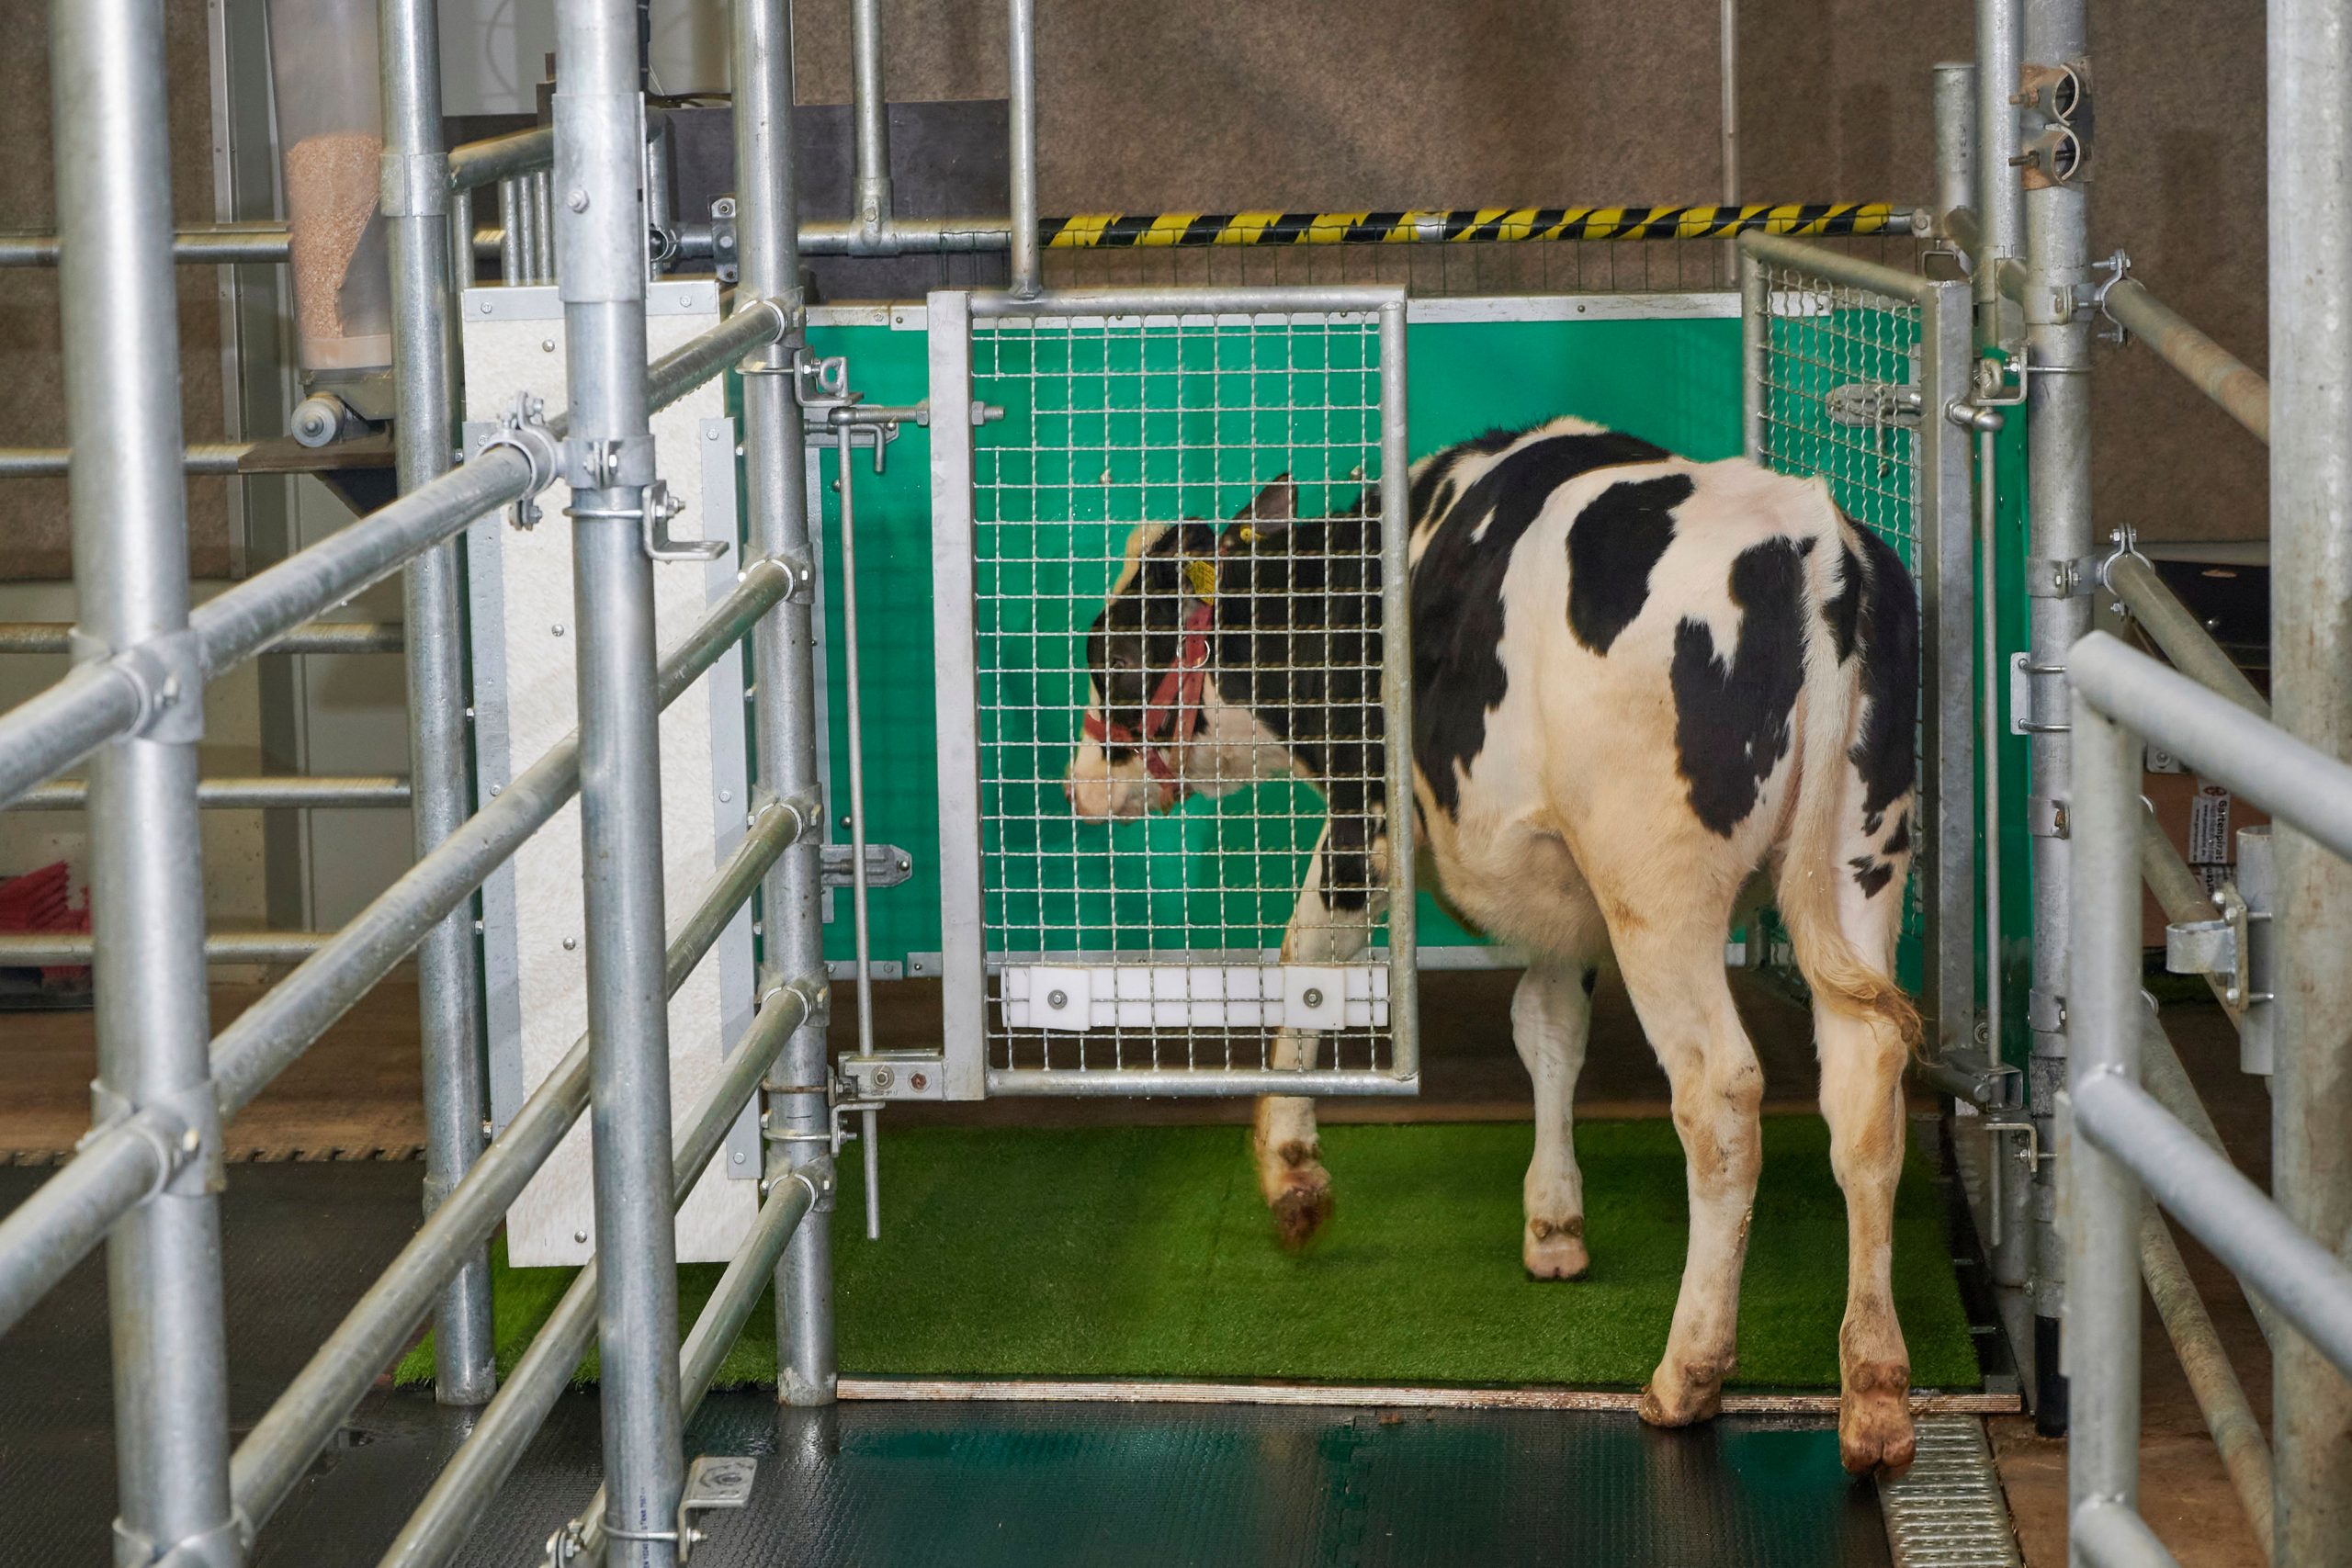 No bull: Scientists potty train cows to use ‘MooLoo’